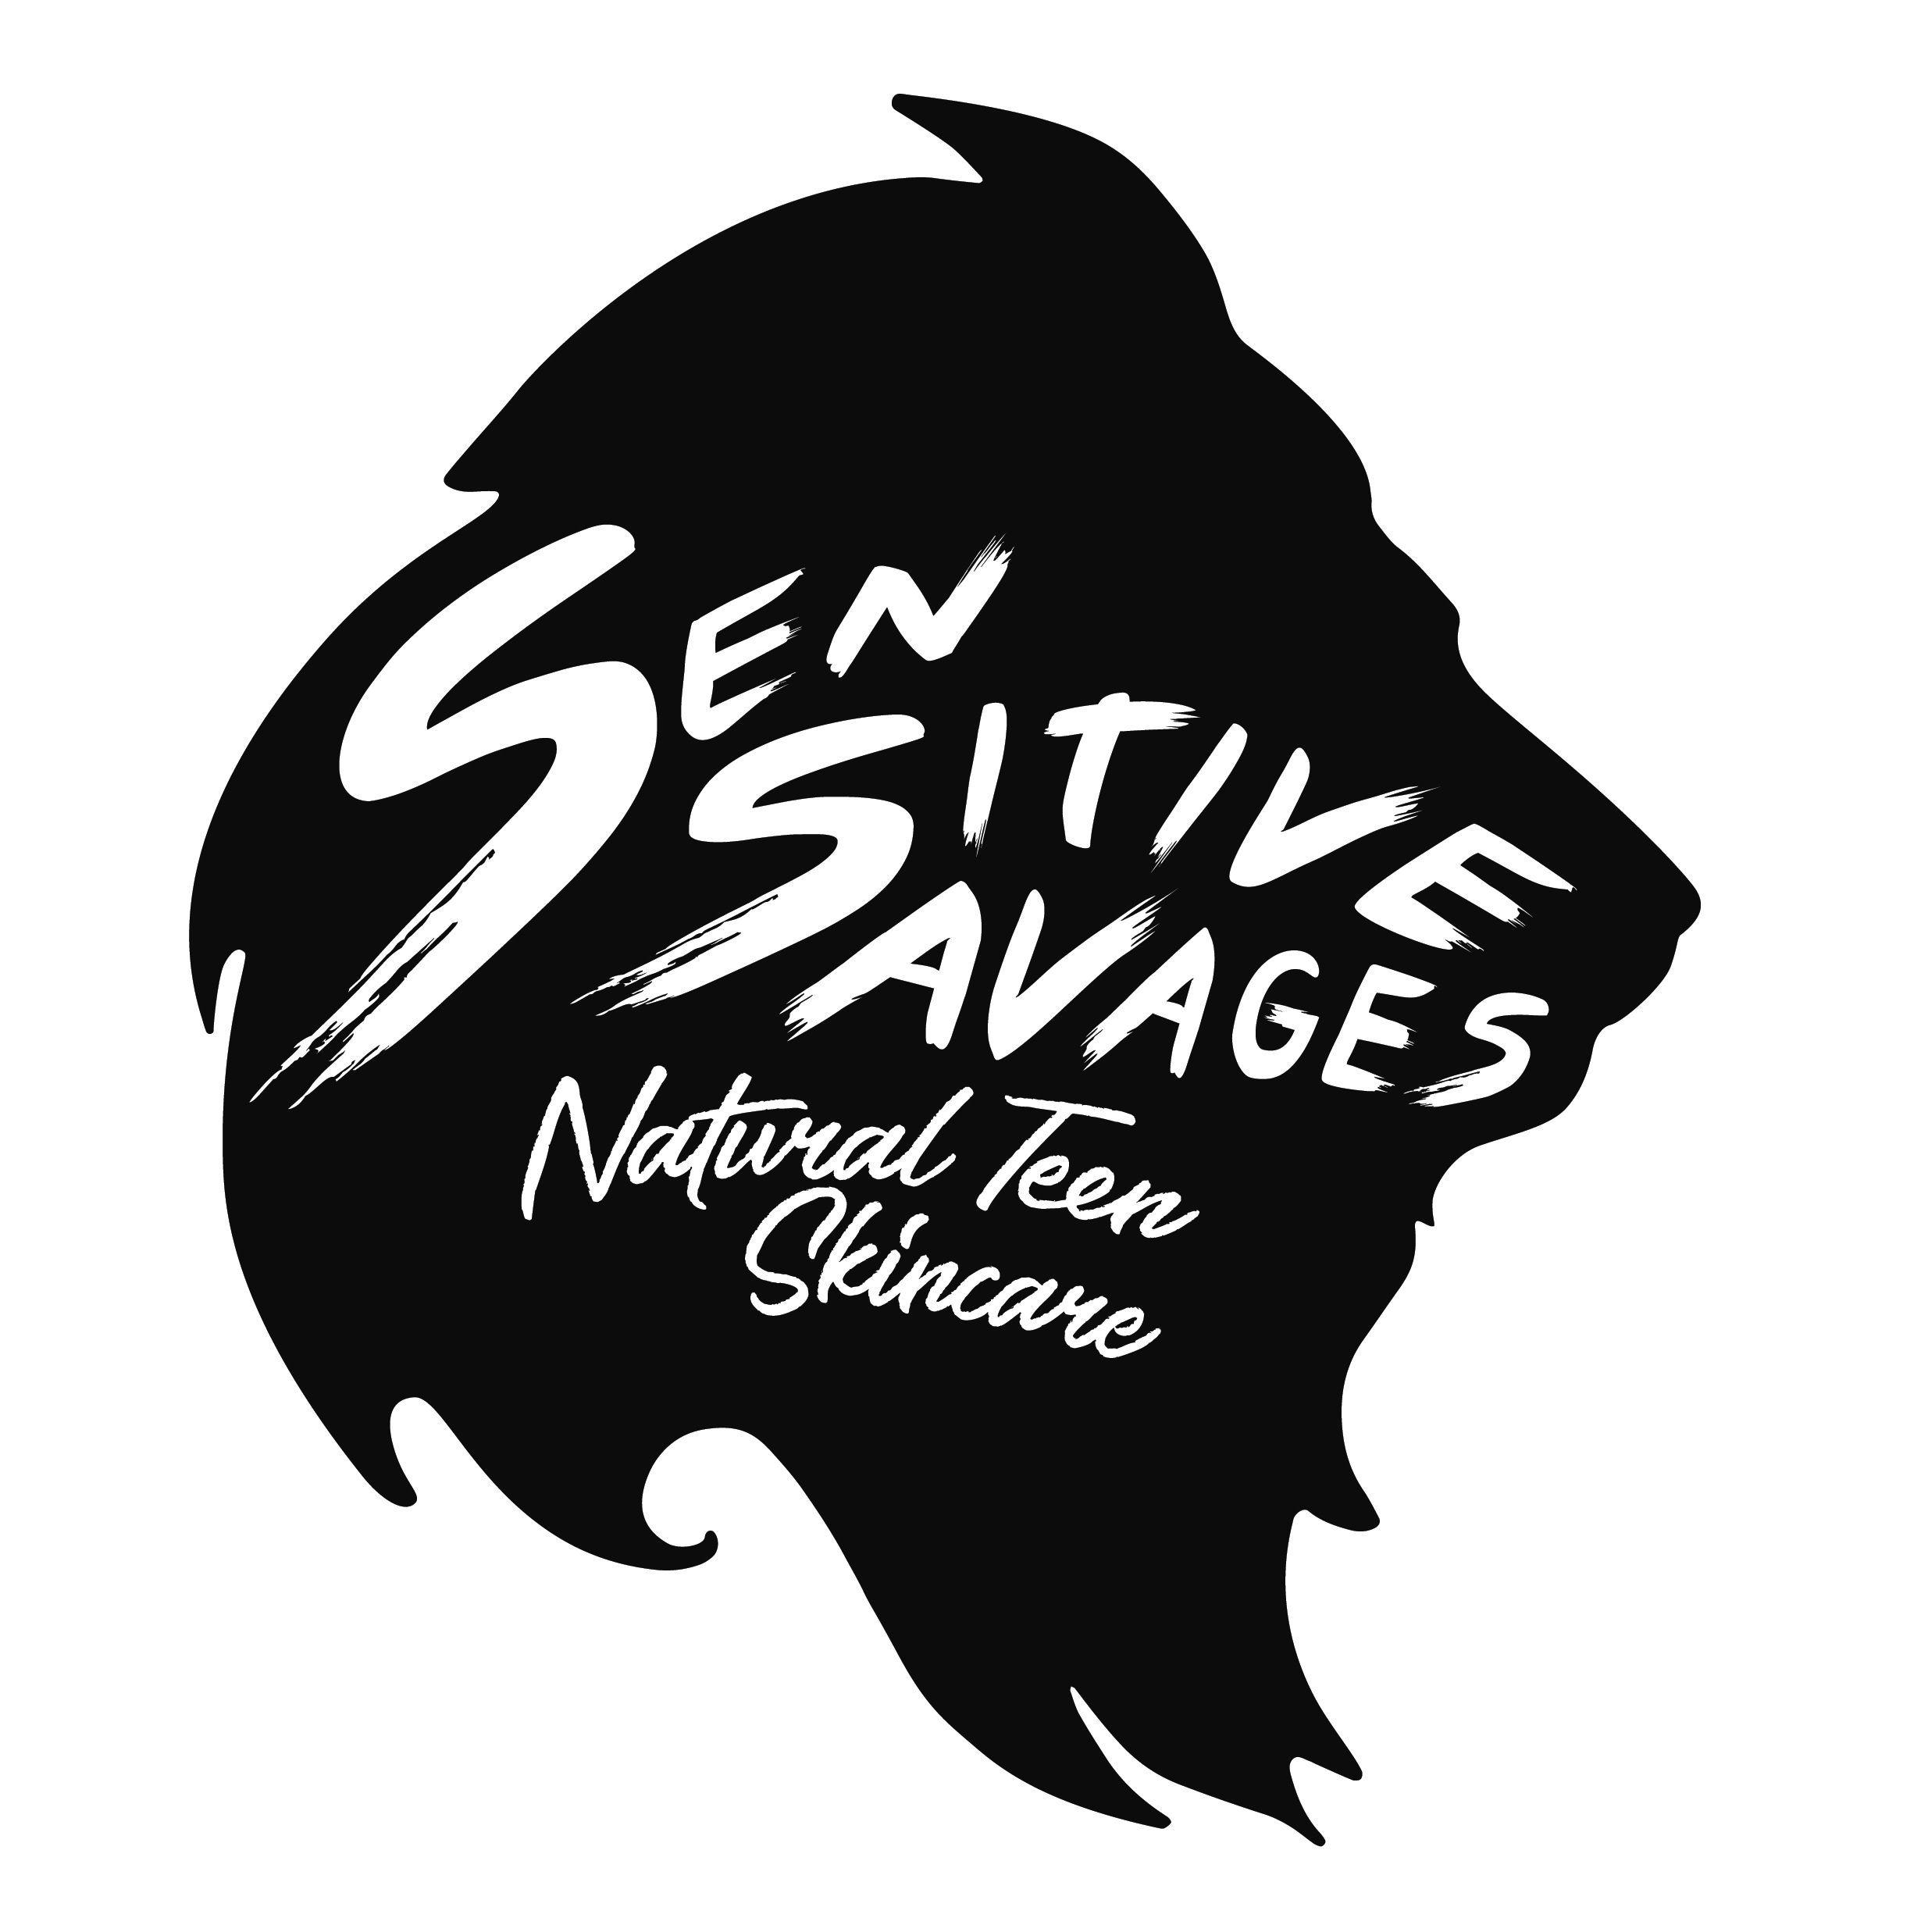 Savages Logo - The Sensitive Savages modern edgy youthful logo has a grunge or punk ...